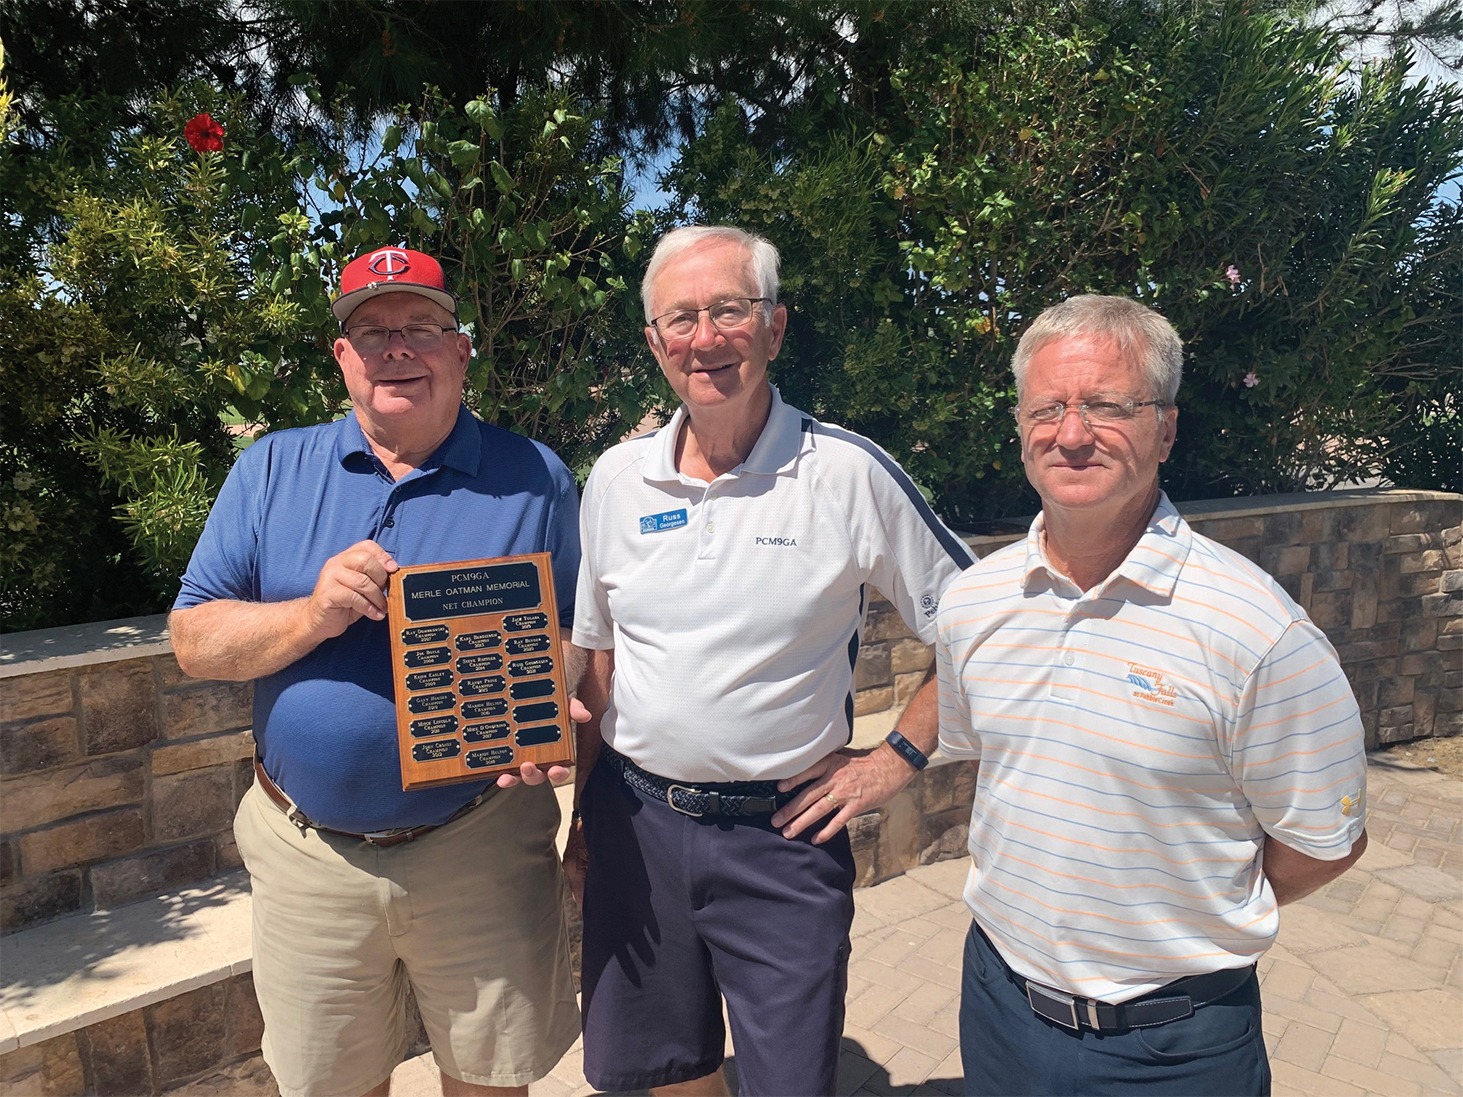 Bill Lansing, PCM9GA director of golf operations, presents the 2021 Men’s 9 Holers Net Champion plaque to Russ Georgesen with Tuscany pro David Vader